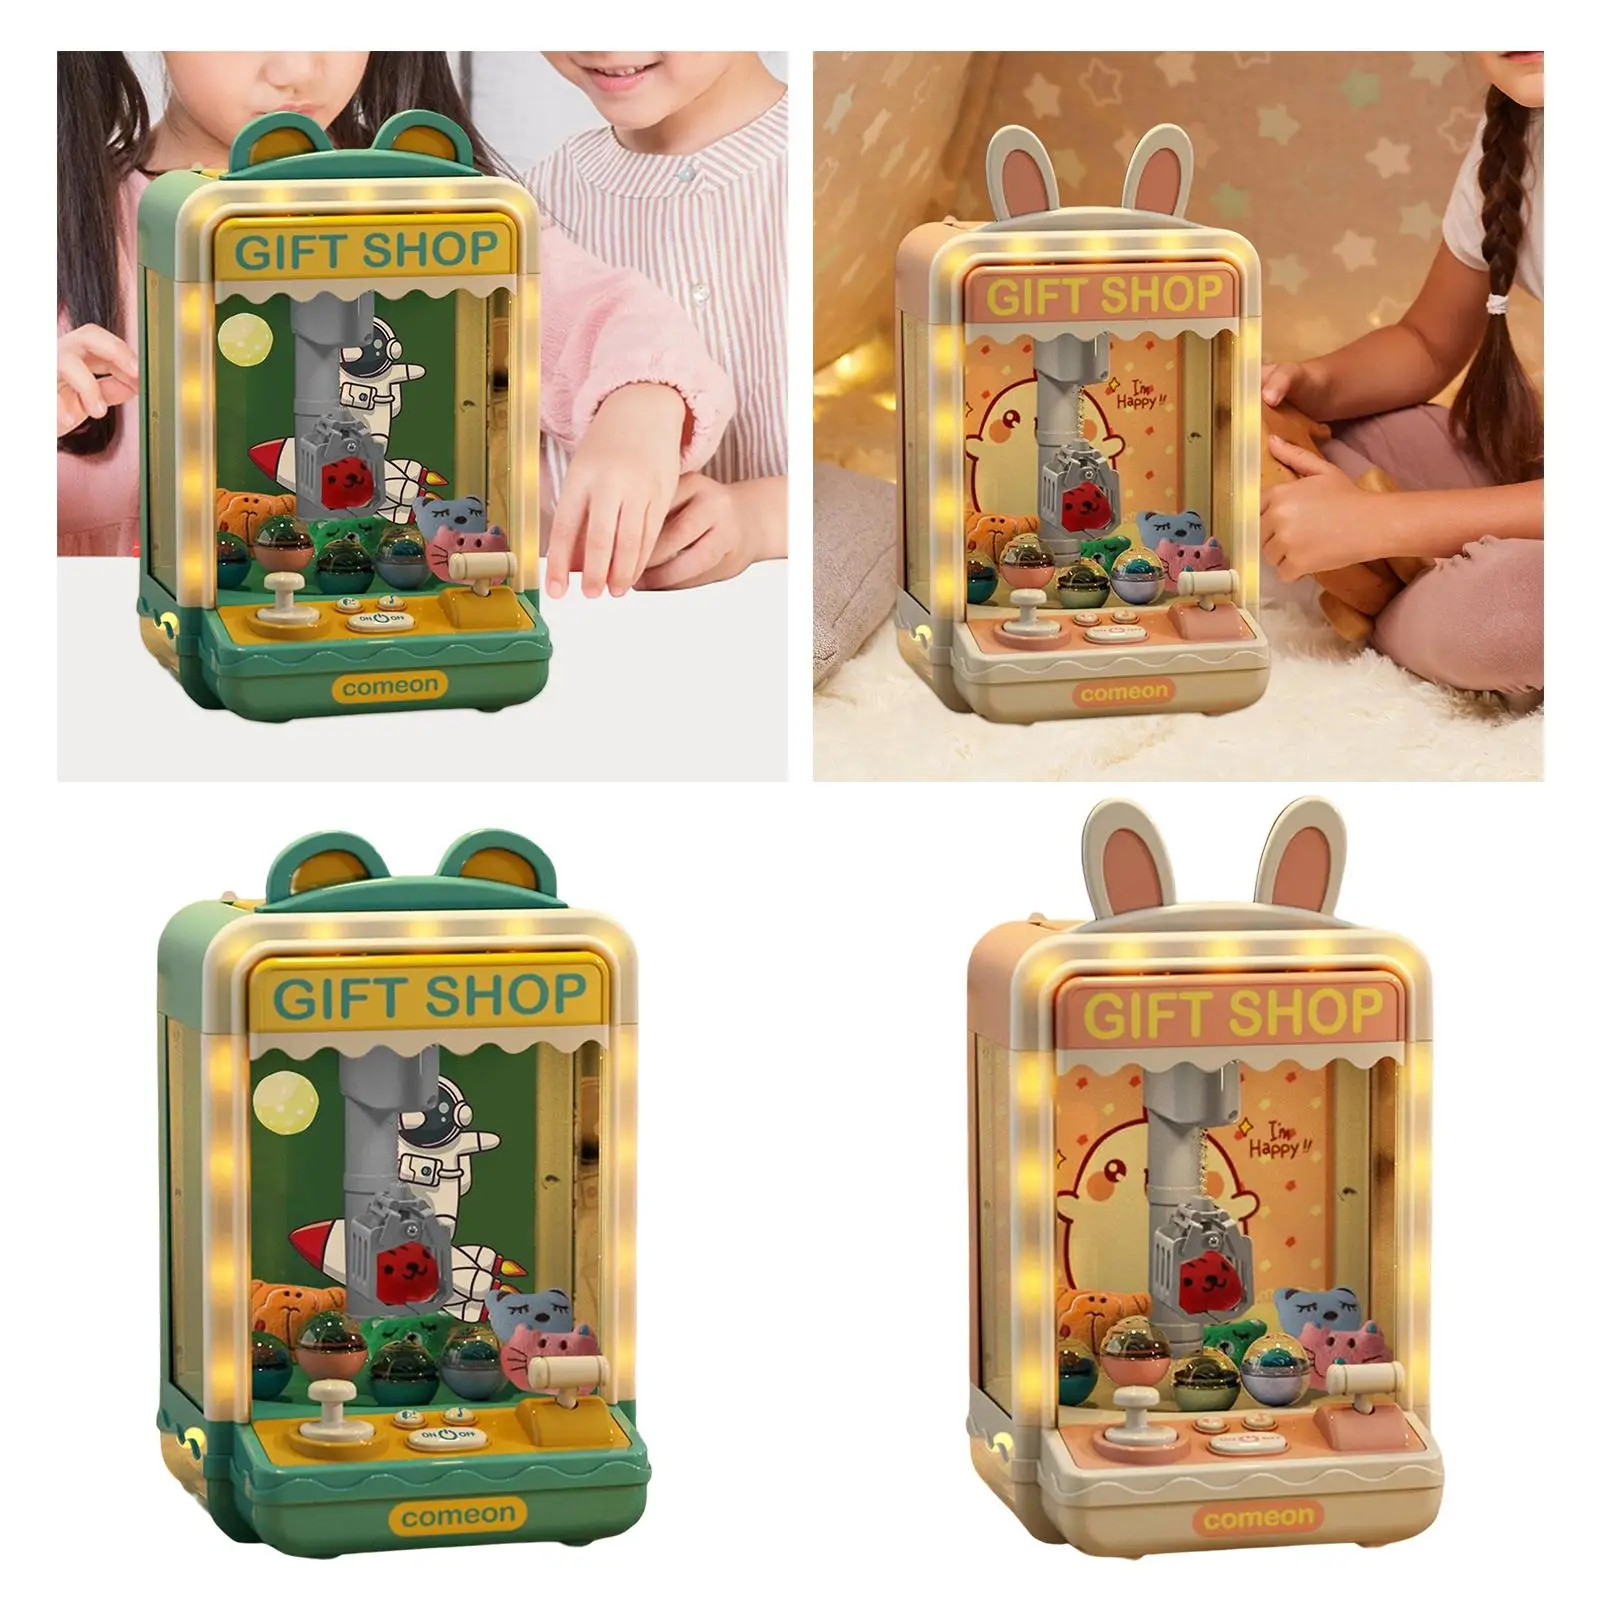 Automatic Doll Claw Machine Portable Stable Mini Vending Machine Game Prizes Toy Easy to Use Play Game for Living Room Children